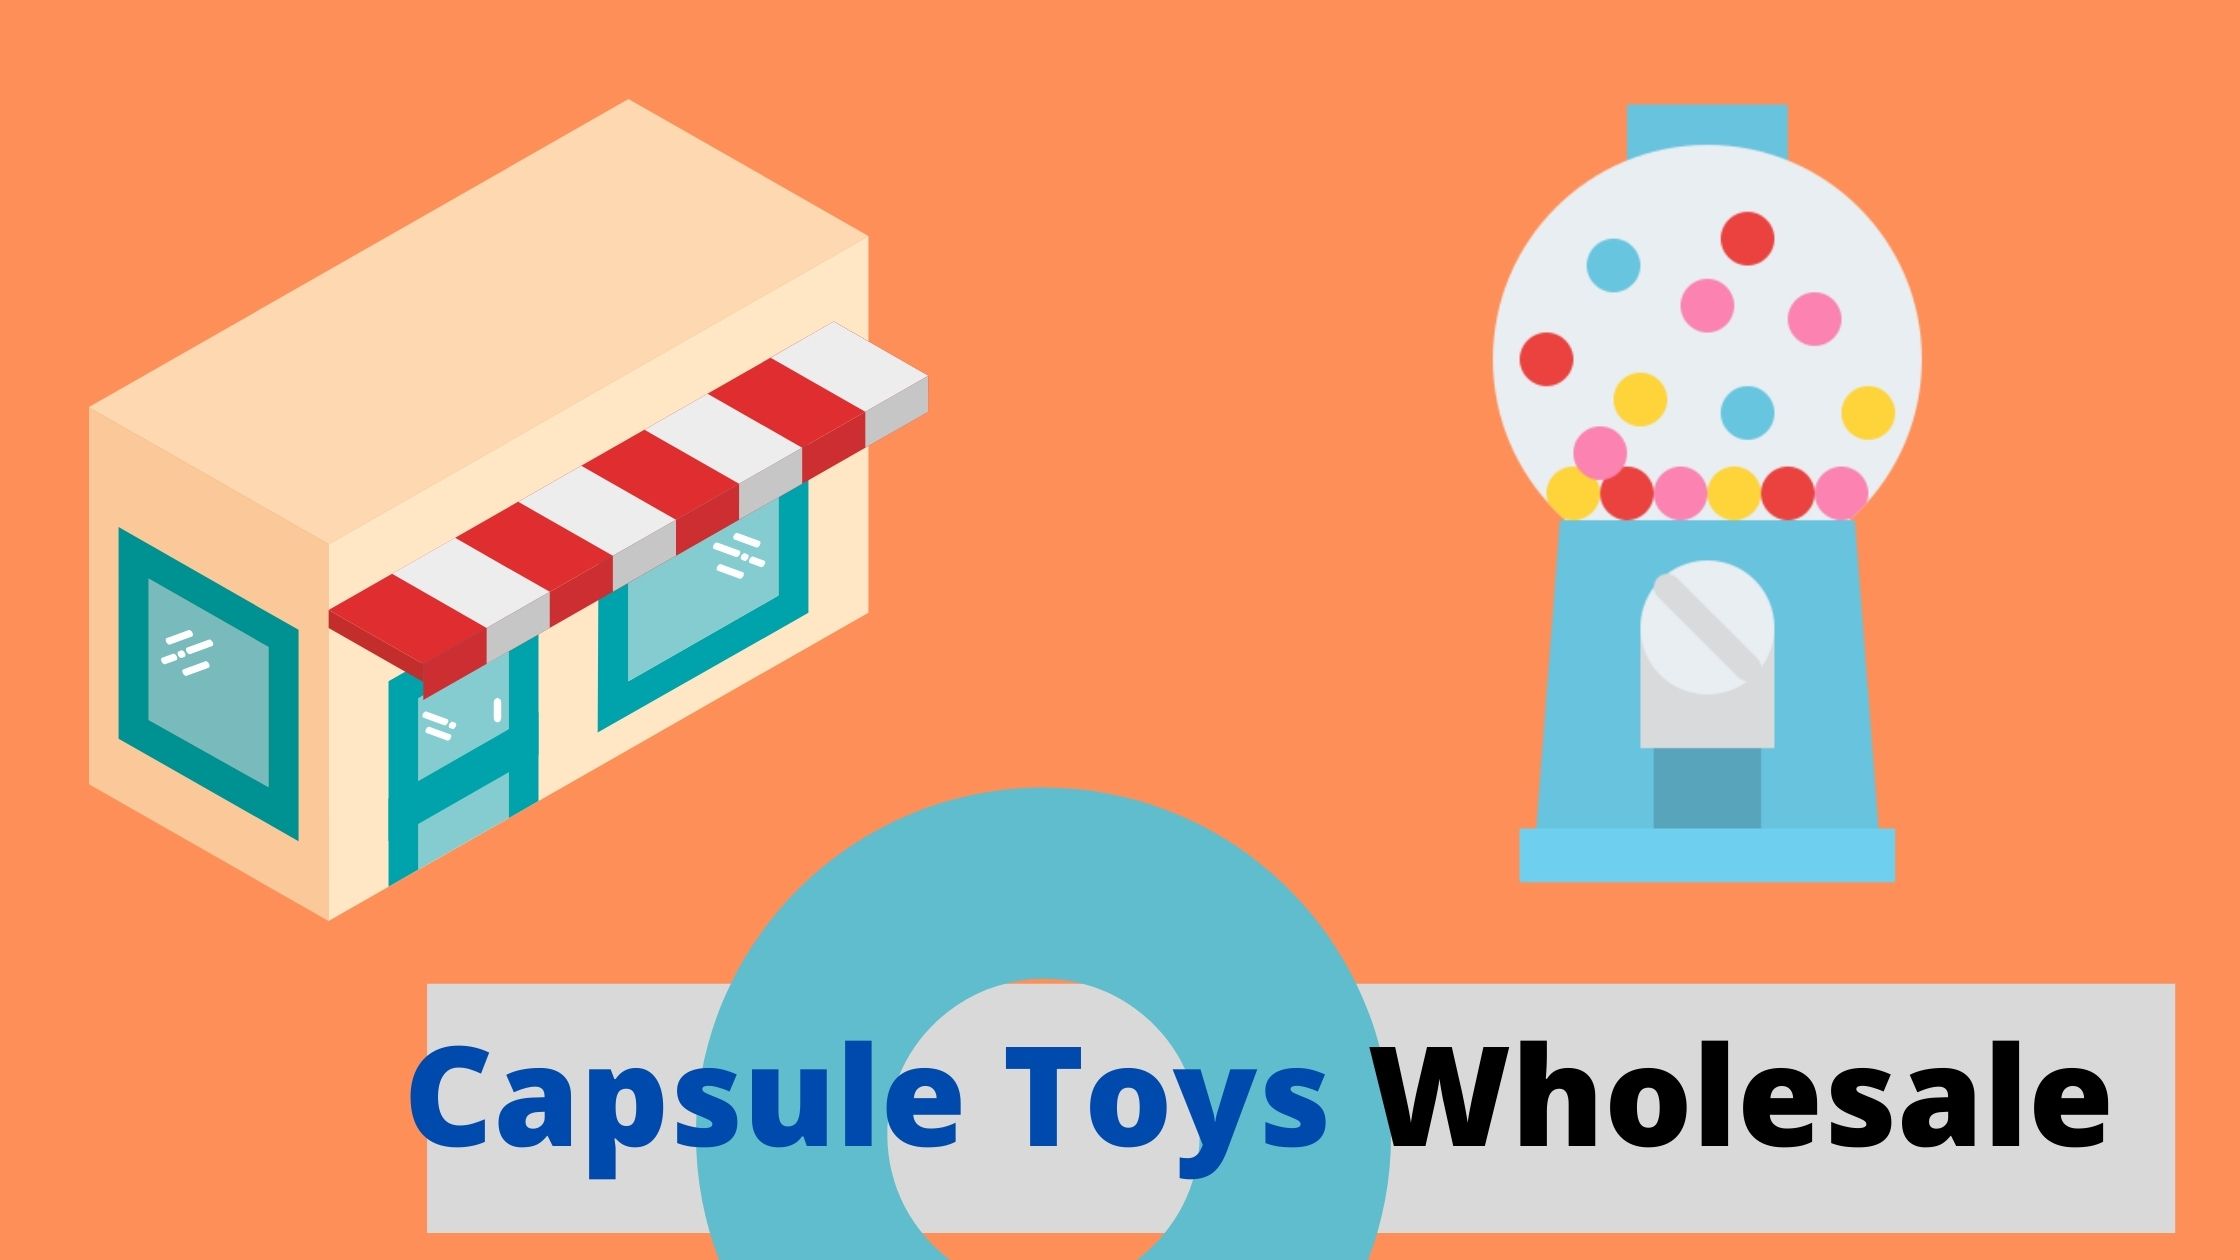 Where to get the Best Capsule Toys Wholesale